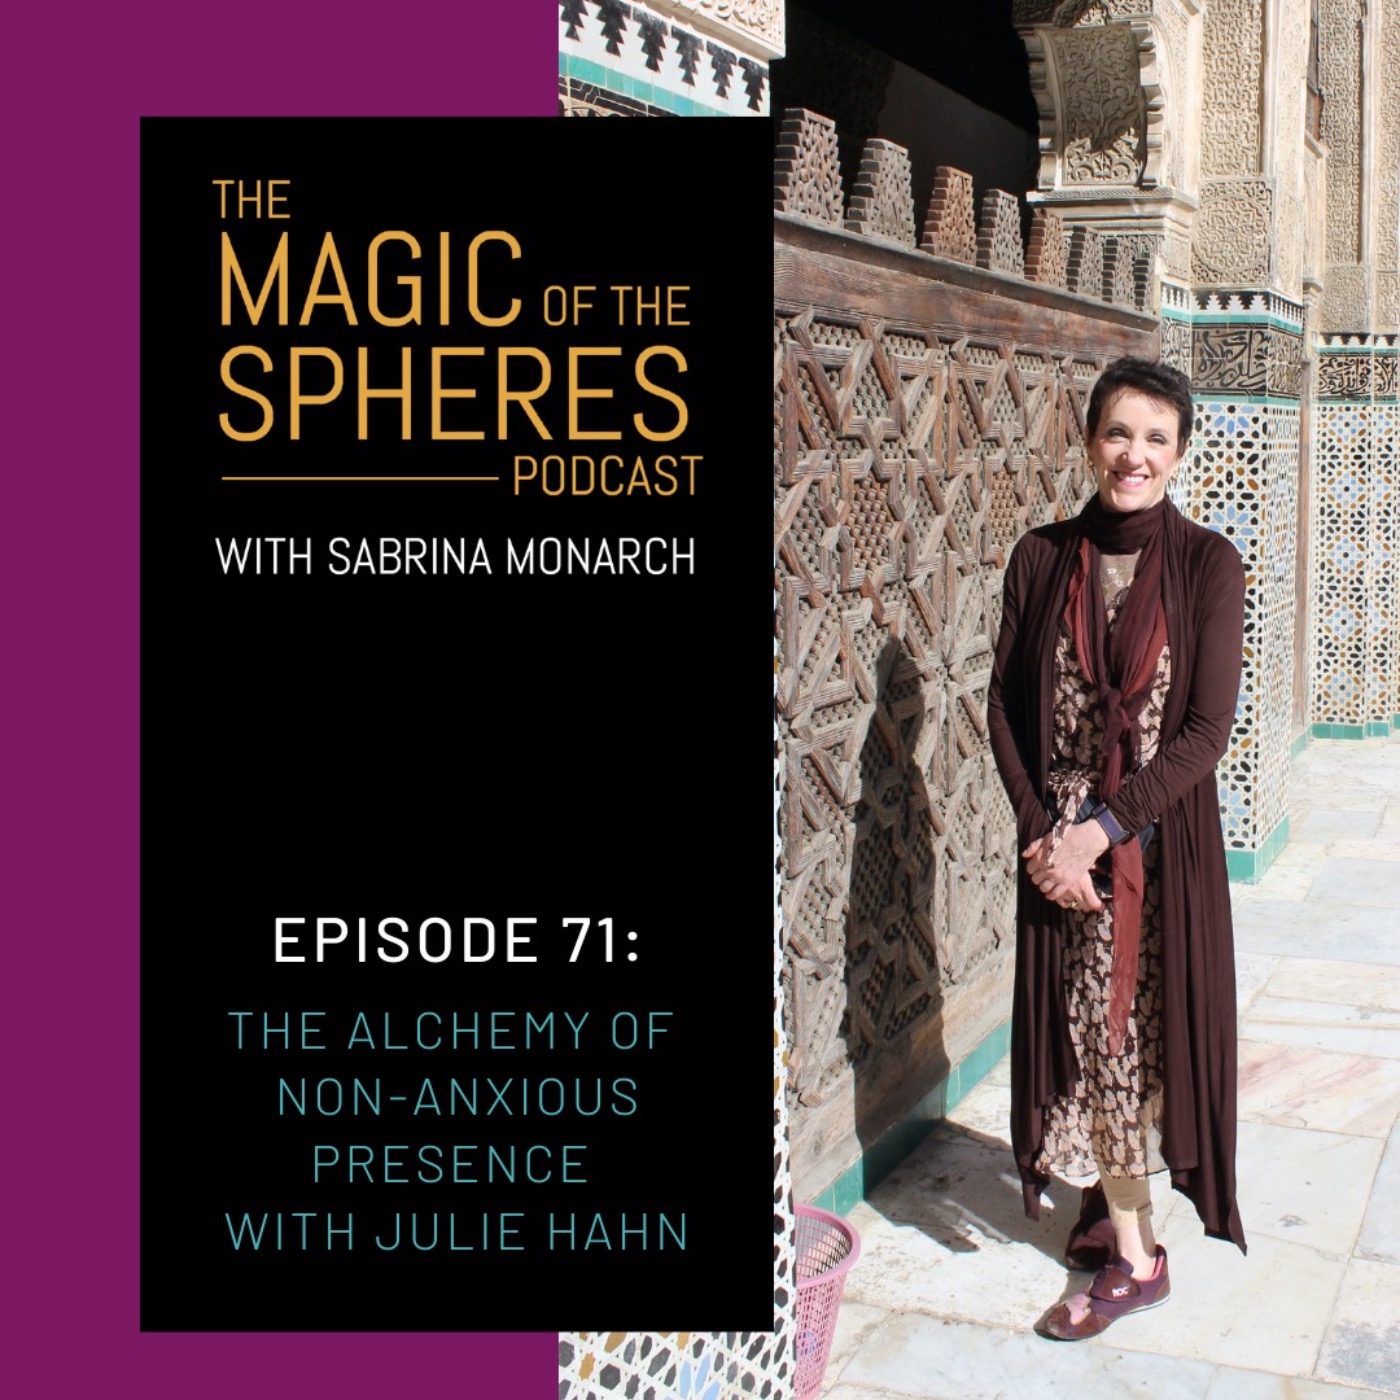 The Alchemy of Non-anxious Presence with Julie Hahn